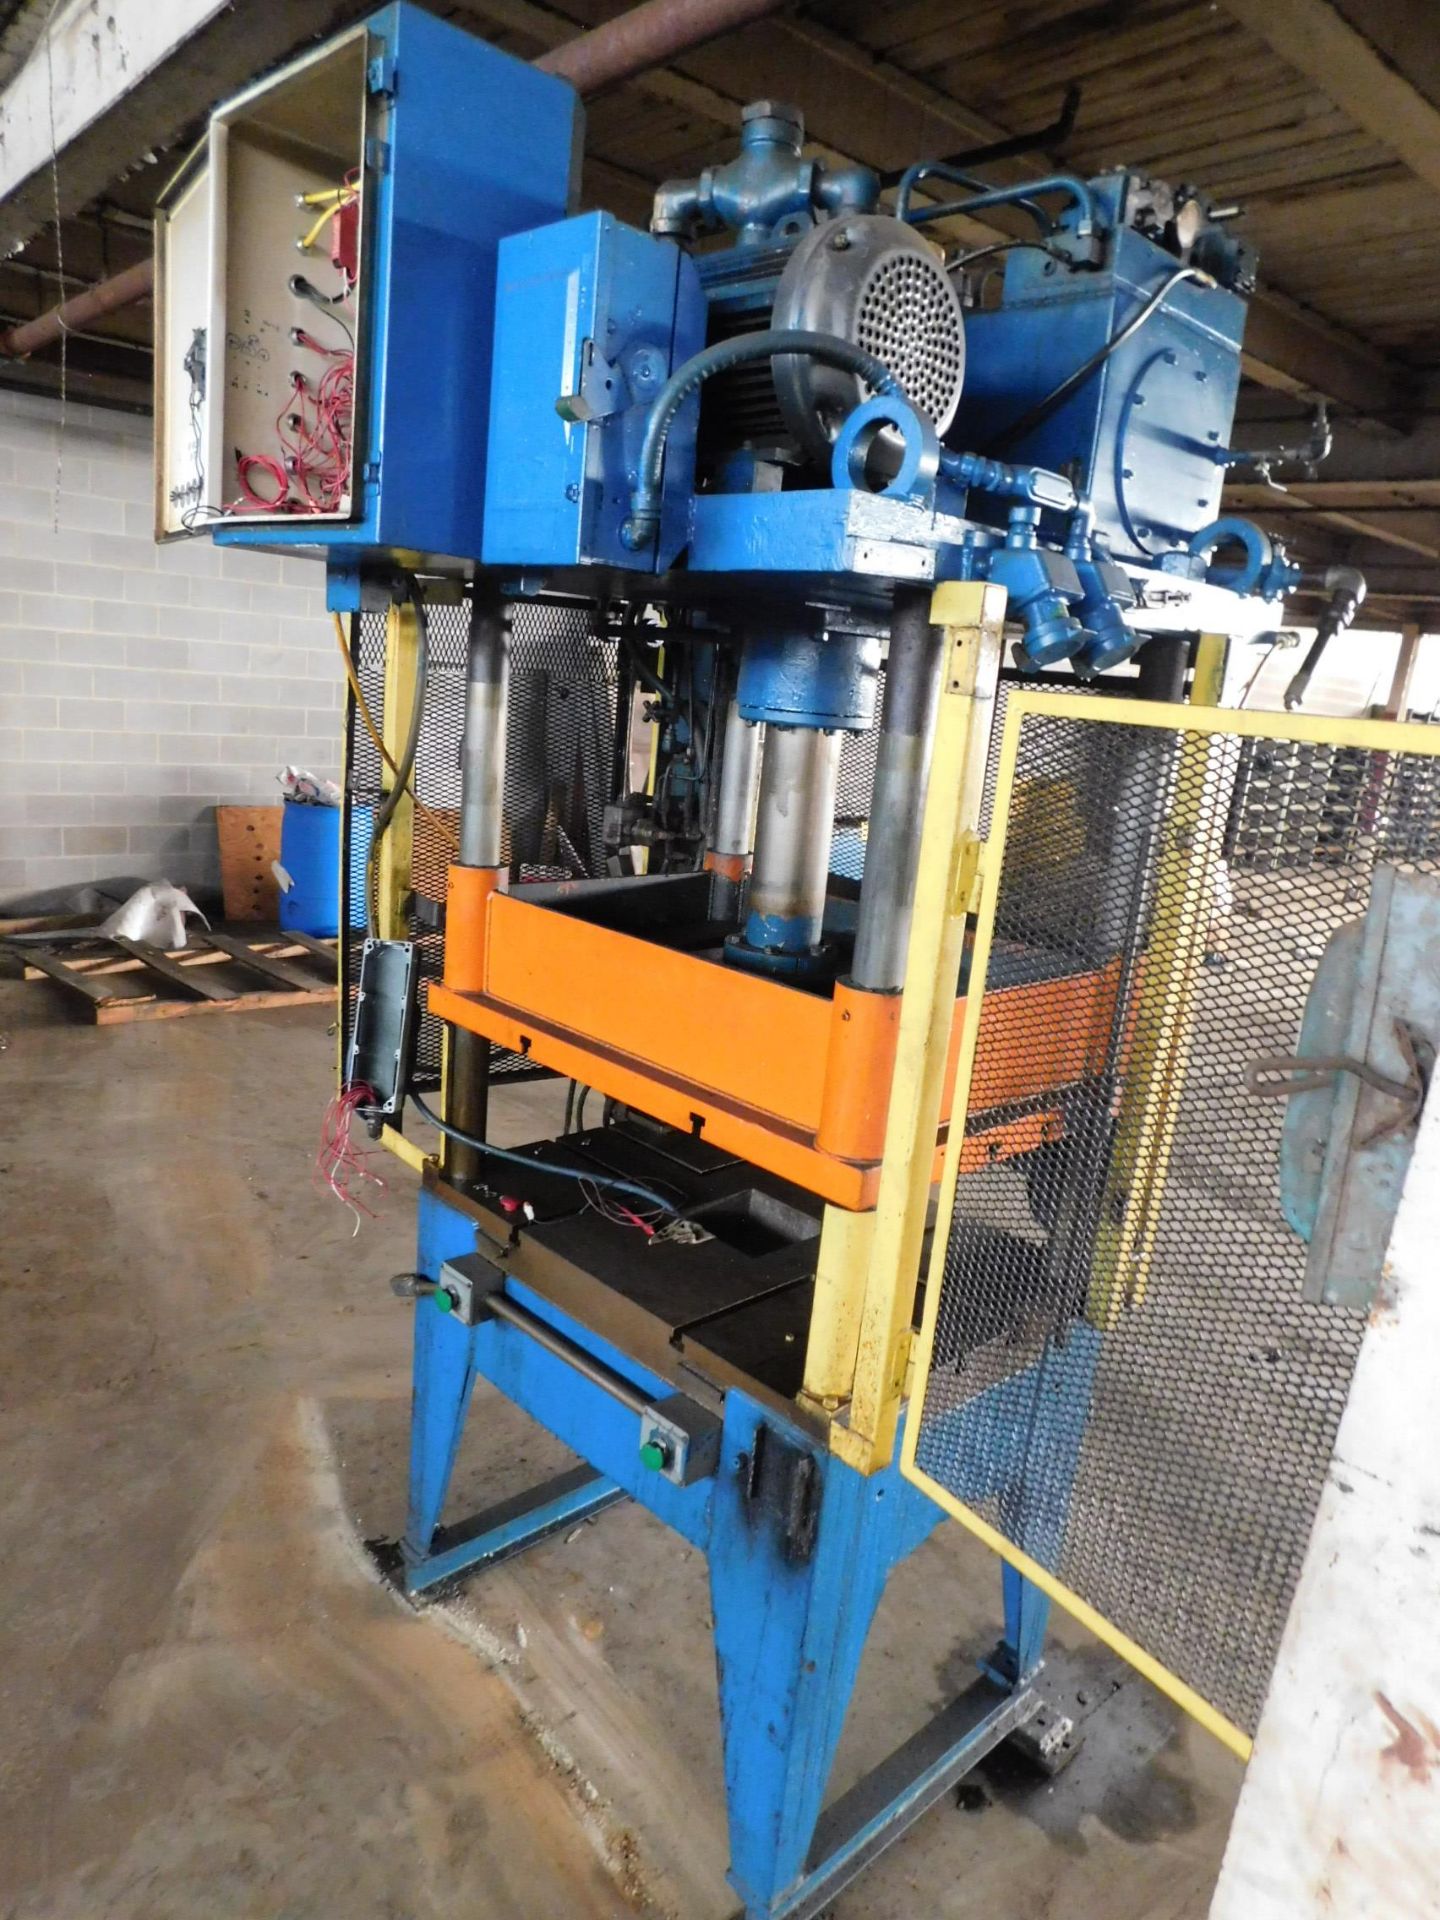 4-Post Hydraulic Press, 32" X 44" Bed and Ram, Approx. 12" Stroke, 13" Daylight with Ram Down - Image 6 of 6